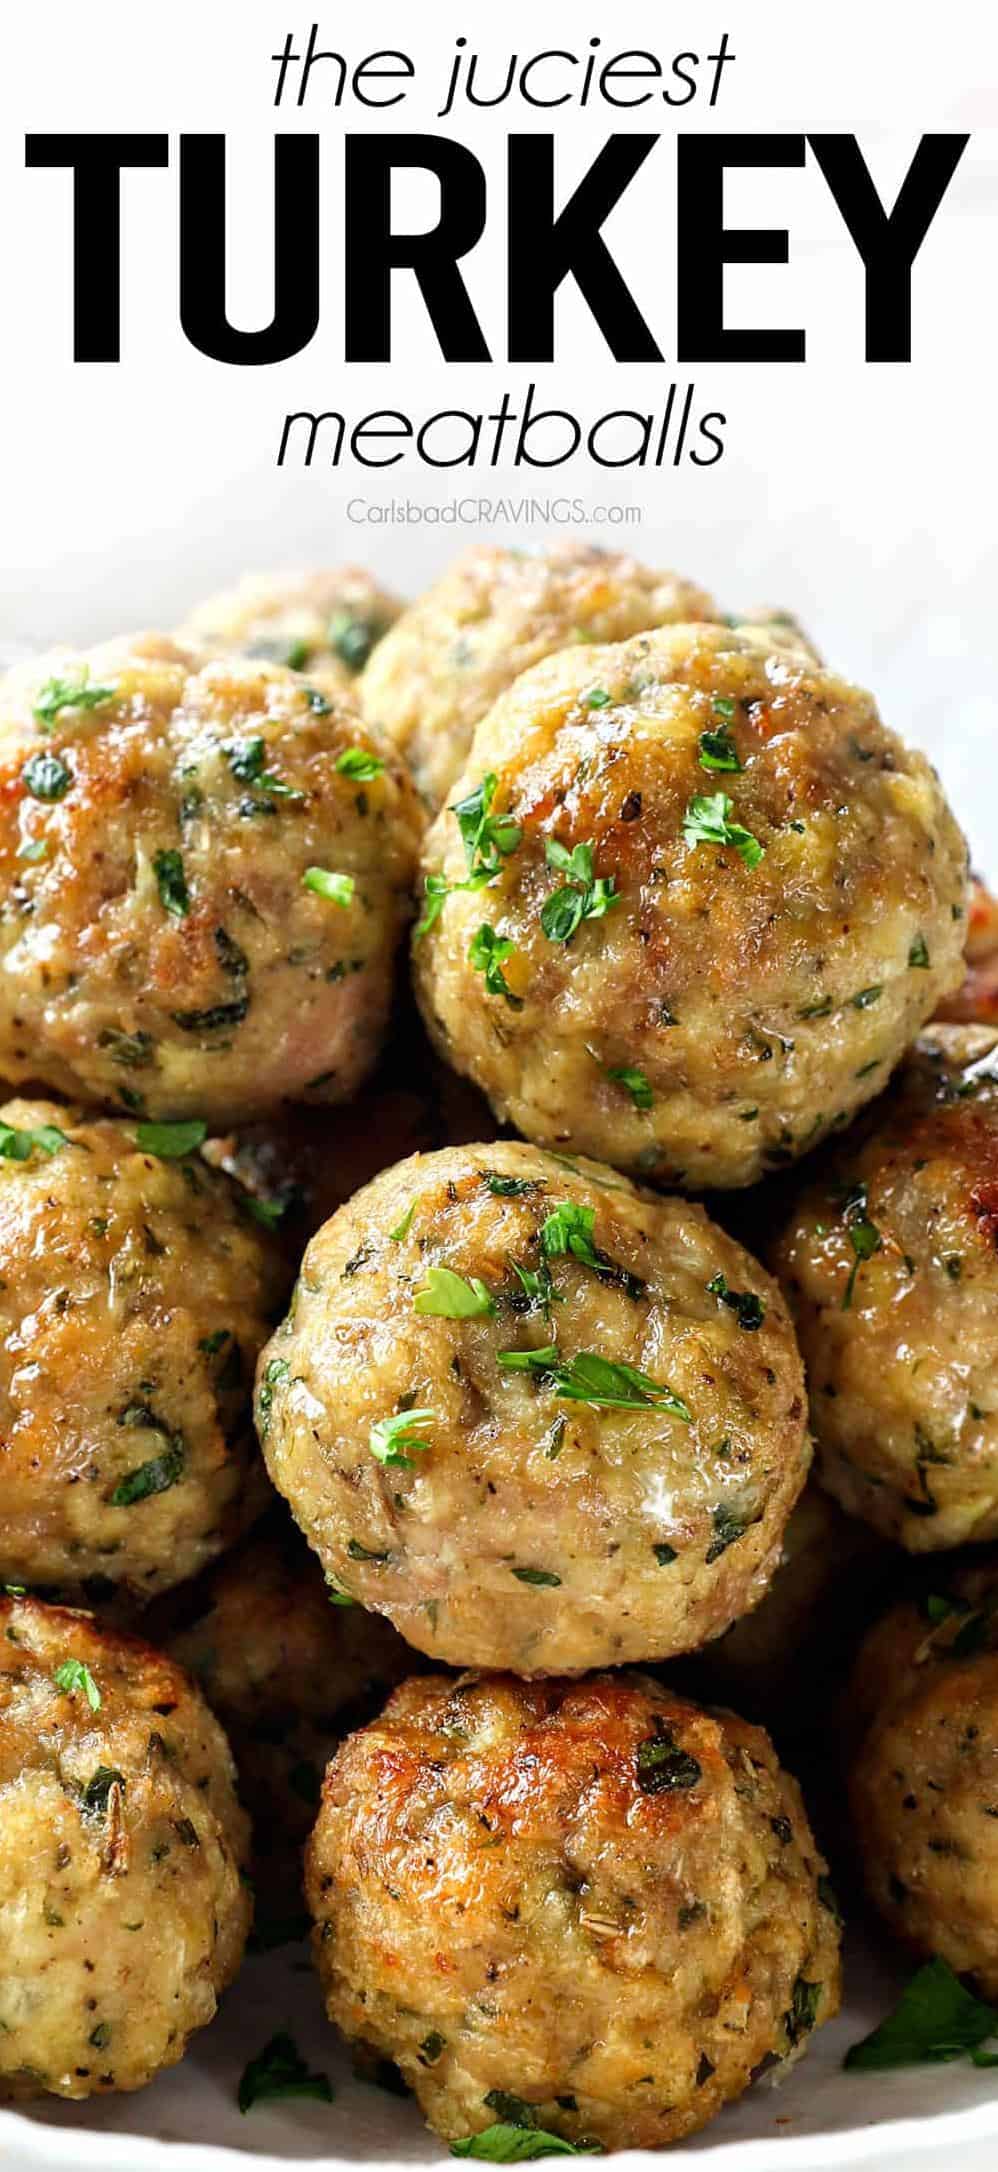  These tender and savory meatballs are the ultimate crowd-pleaser - just look at those crispy edges!